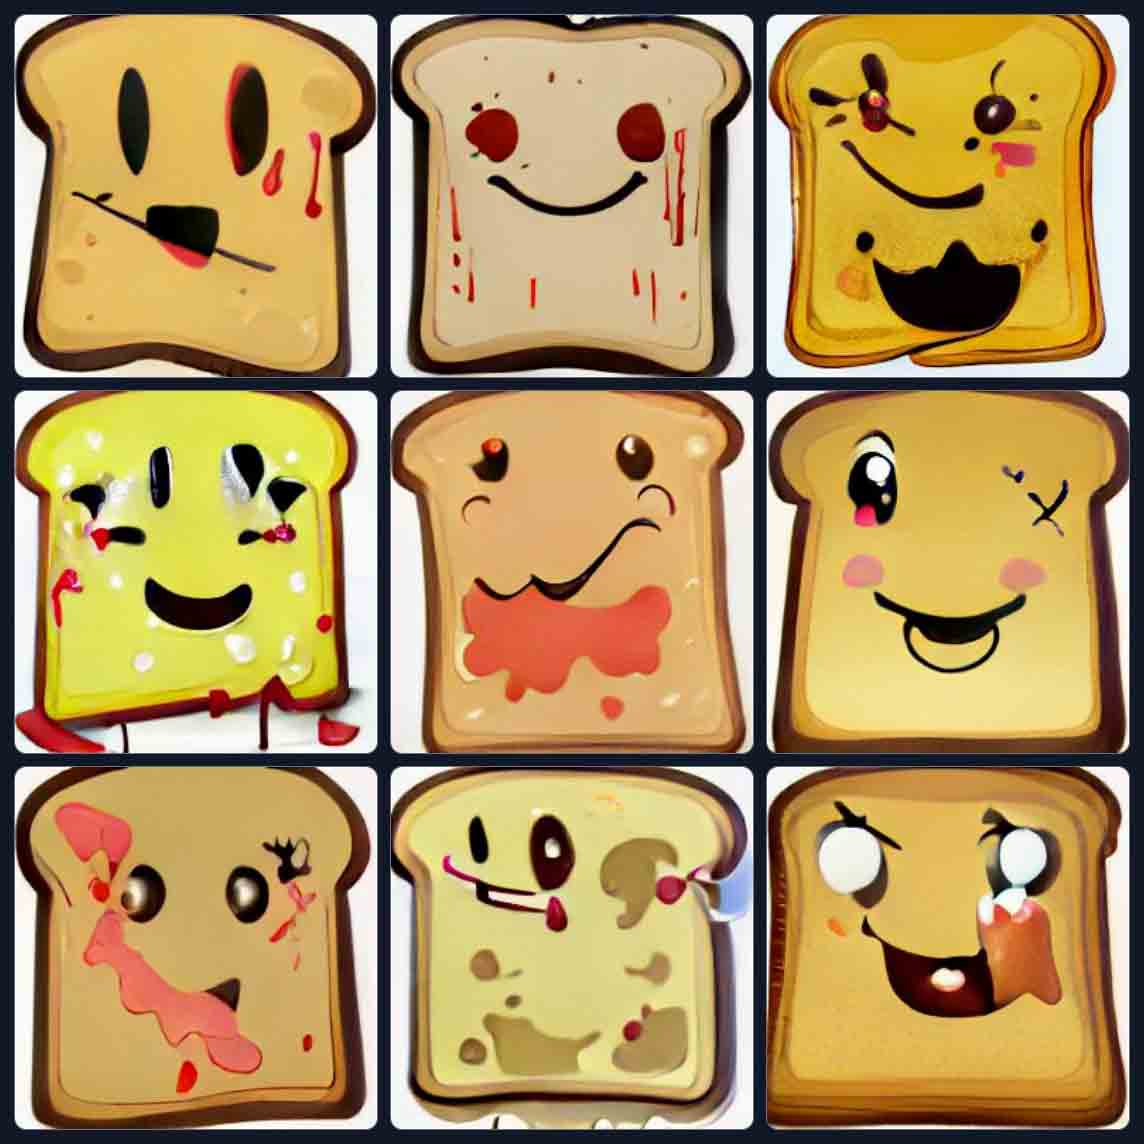 A set of 9 images that look slices of bread, most of them darkened as if toasted, all with chaotic spatters of red, smiling mouths, and horror show eyes of black, white, or in one case, an X where an eye should be.